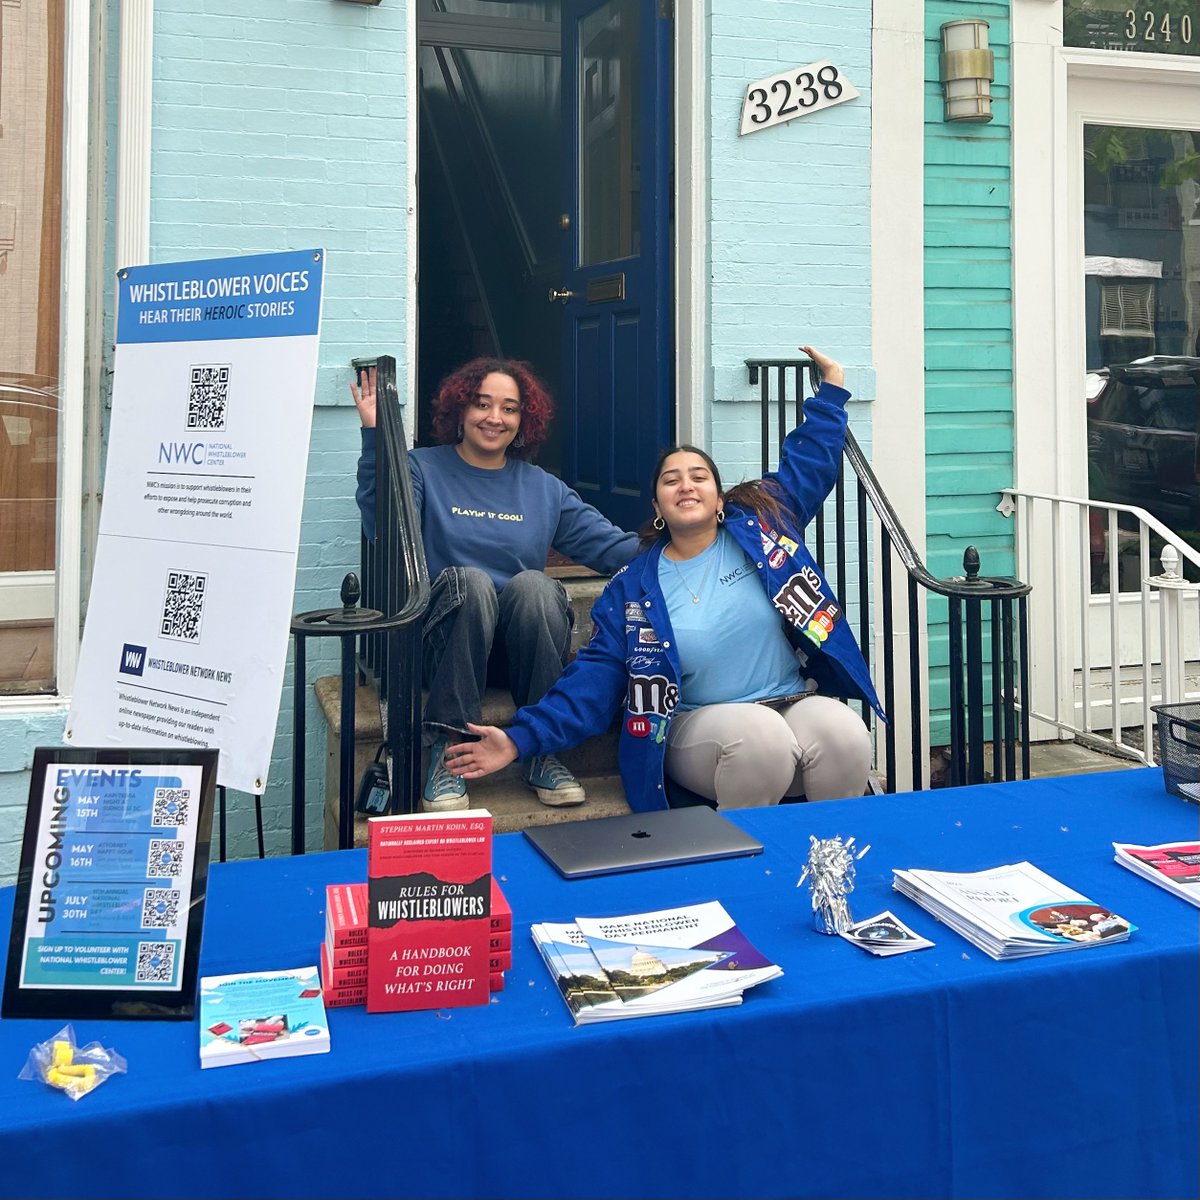 🇫🇷Last weekend, NWC participated in the Georgetown French Market. We spread the word about our work and got to spend time with our fellow community members, like Robert Devaney of @TheGeorgetownr Merci to everyone who stopped by our table! #georgetownfrenchmarketdc